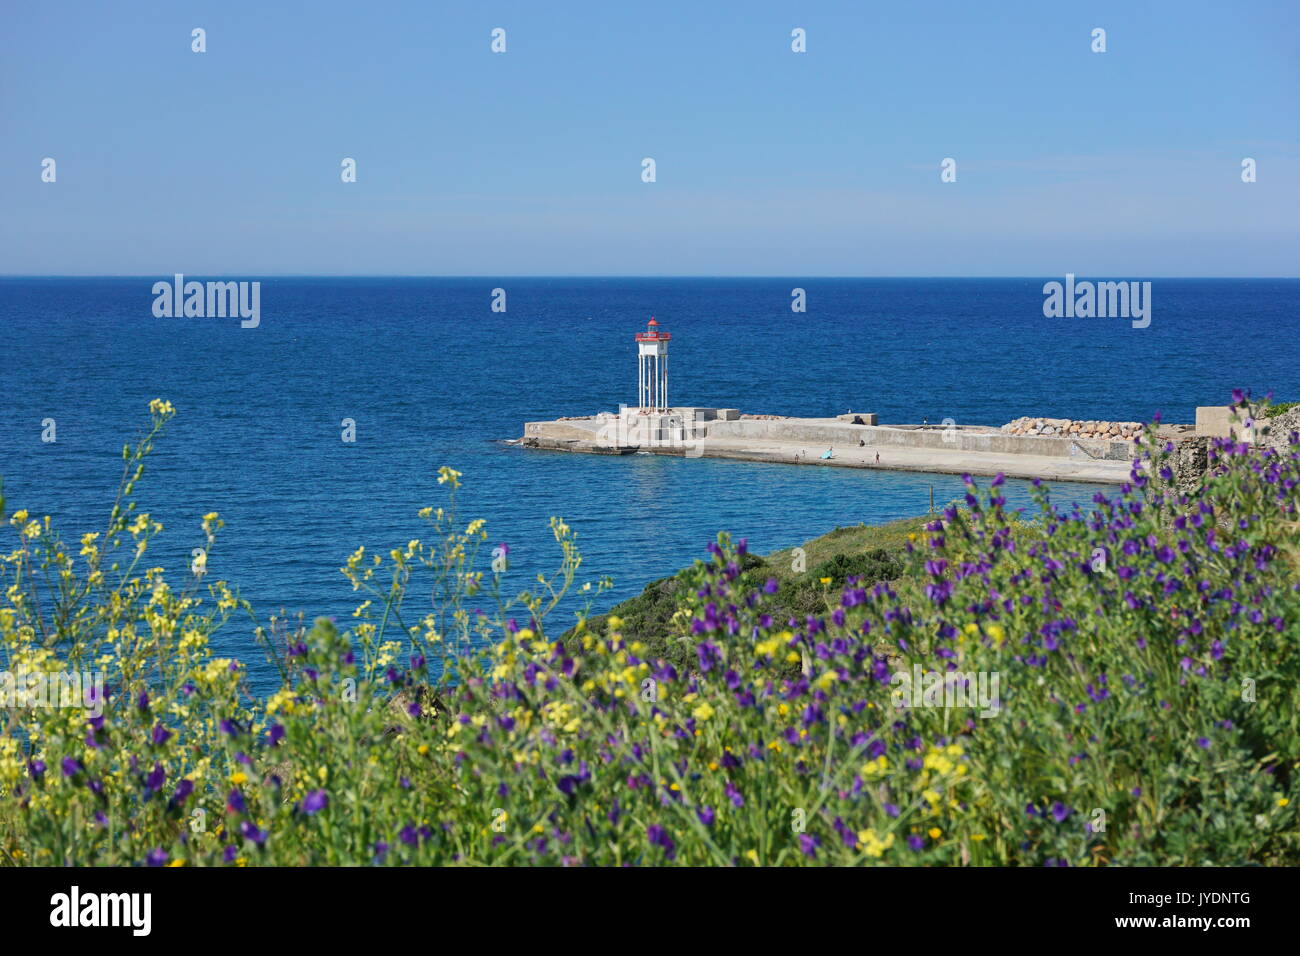 Jetty with a lighthouse and flowers in foreground, Port-Vendres, Vermilion coast, Mediterranean sea, Roussillon, Pyrenees-Orientales, France Stock Photo